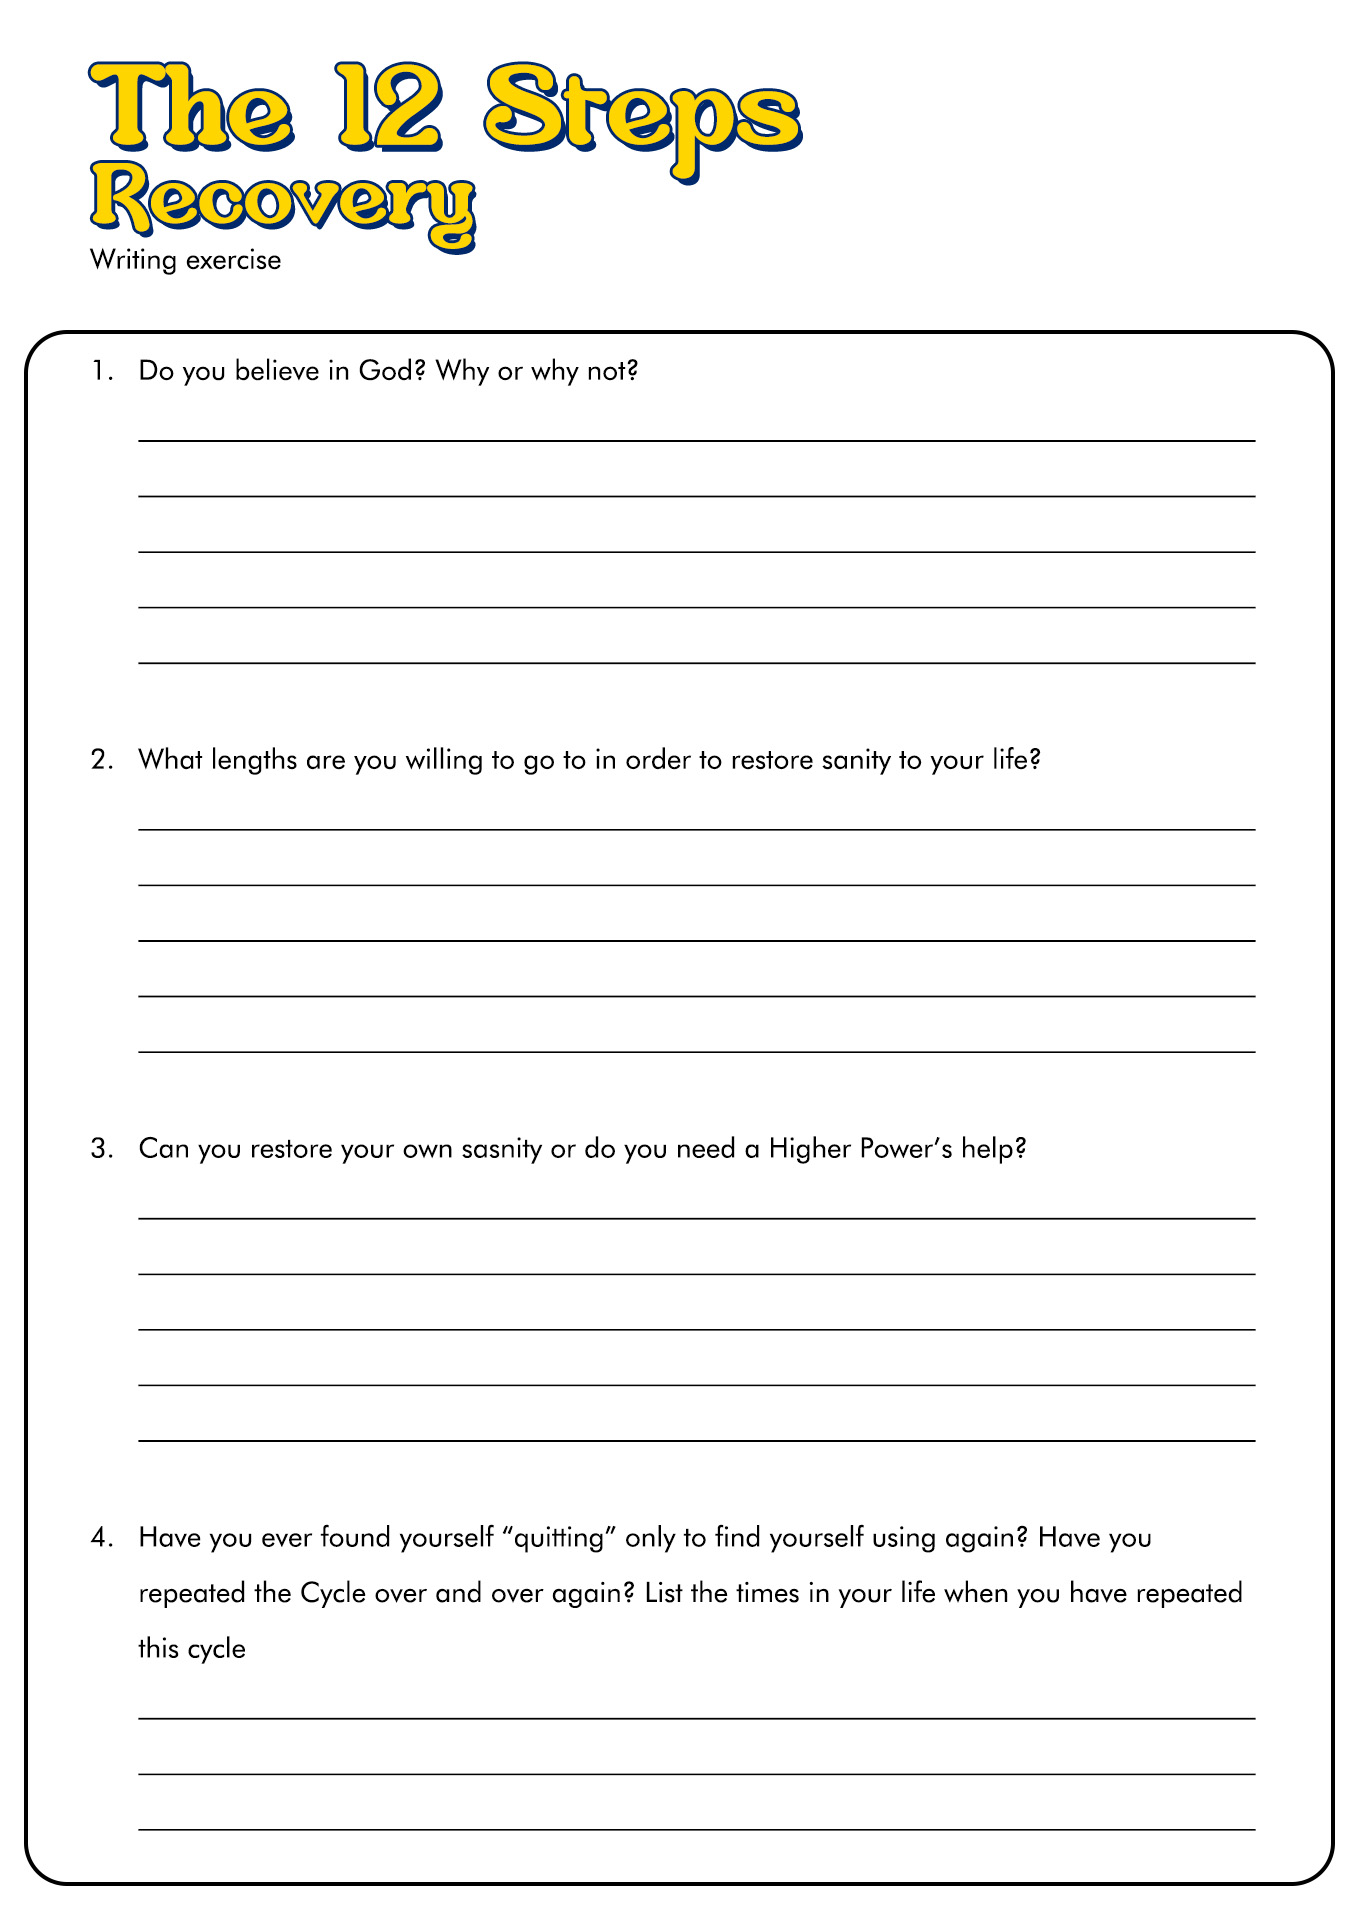 15-12-step-recovery-worksheets-worksheeto